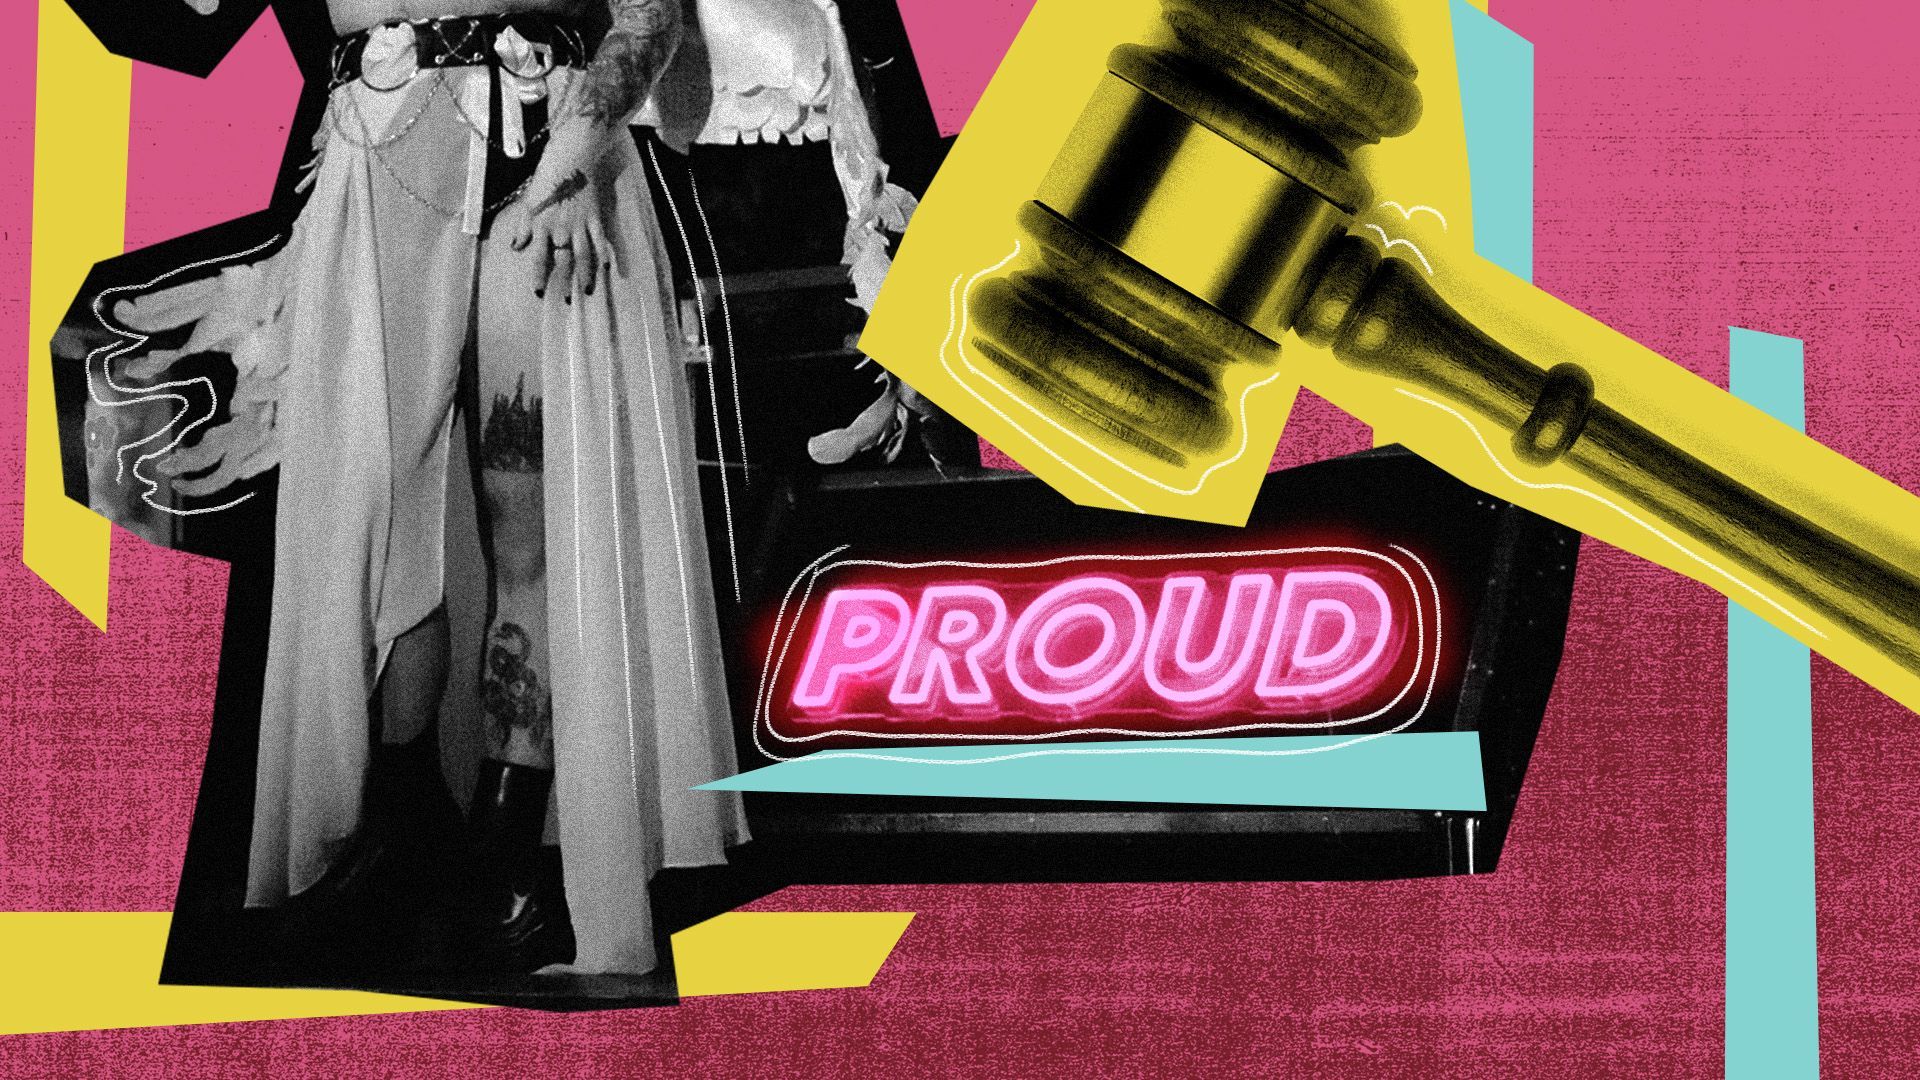 Photo illustration of an H-Town Kings performer next to a "PROUD" neon sign and a gavel with geometric shapes and scribbles in the background.